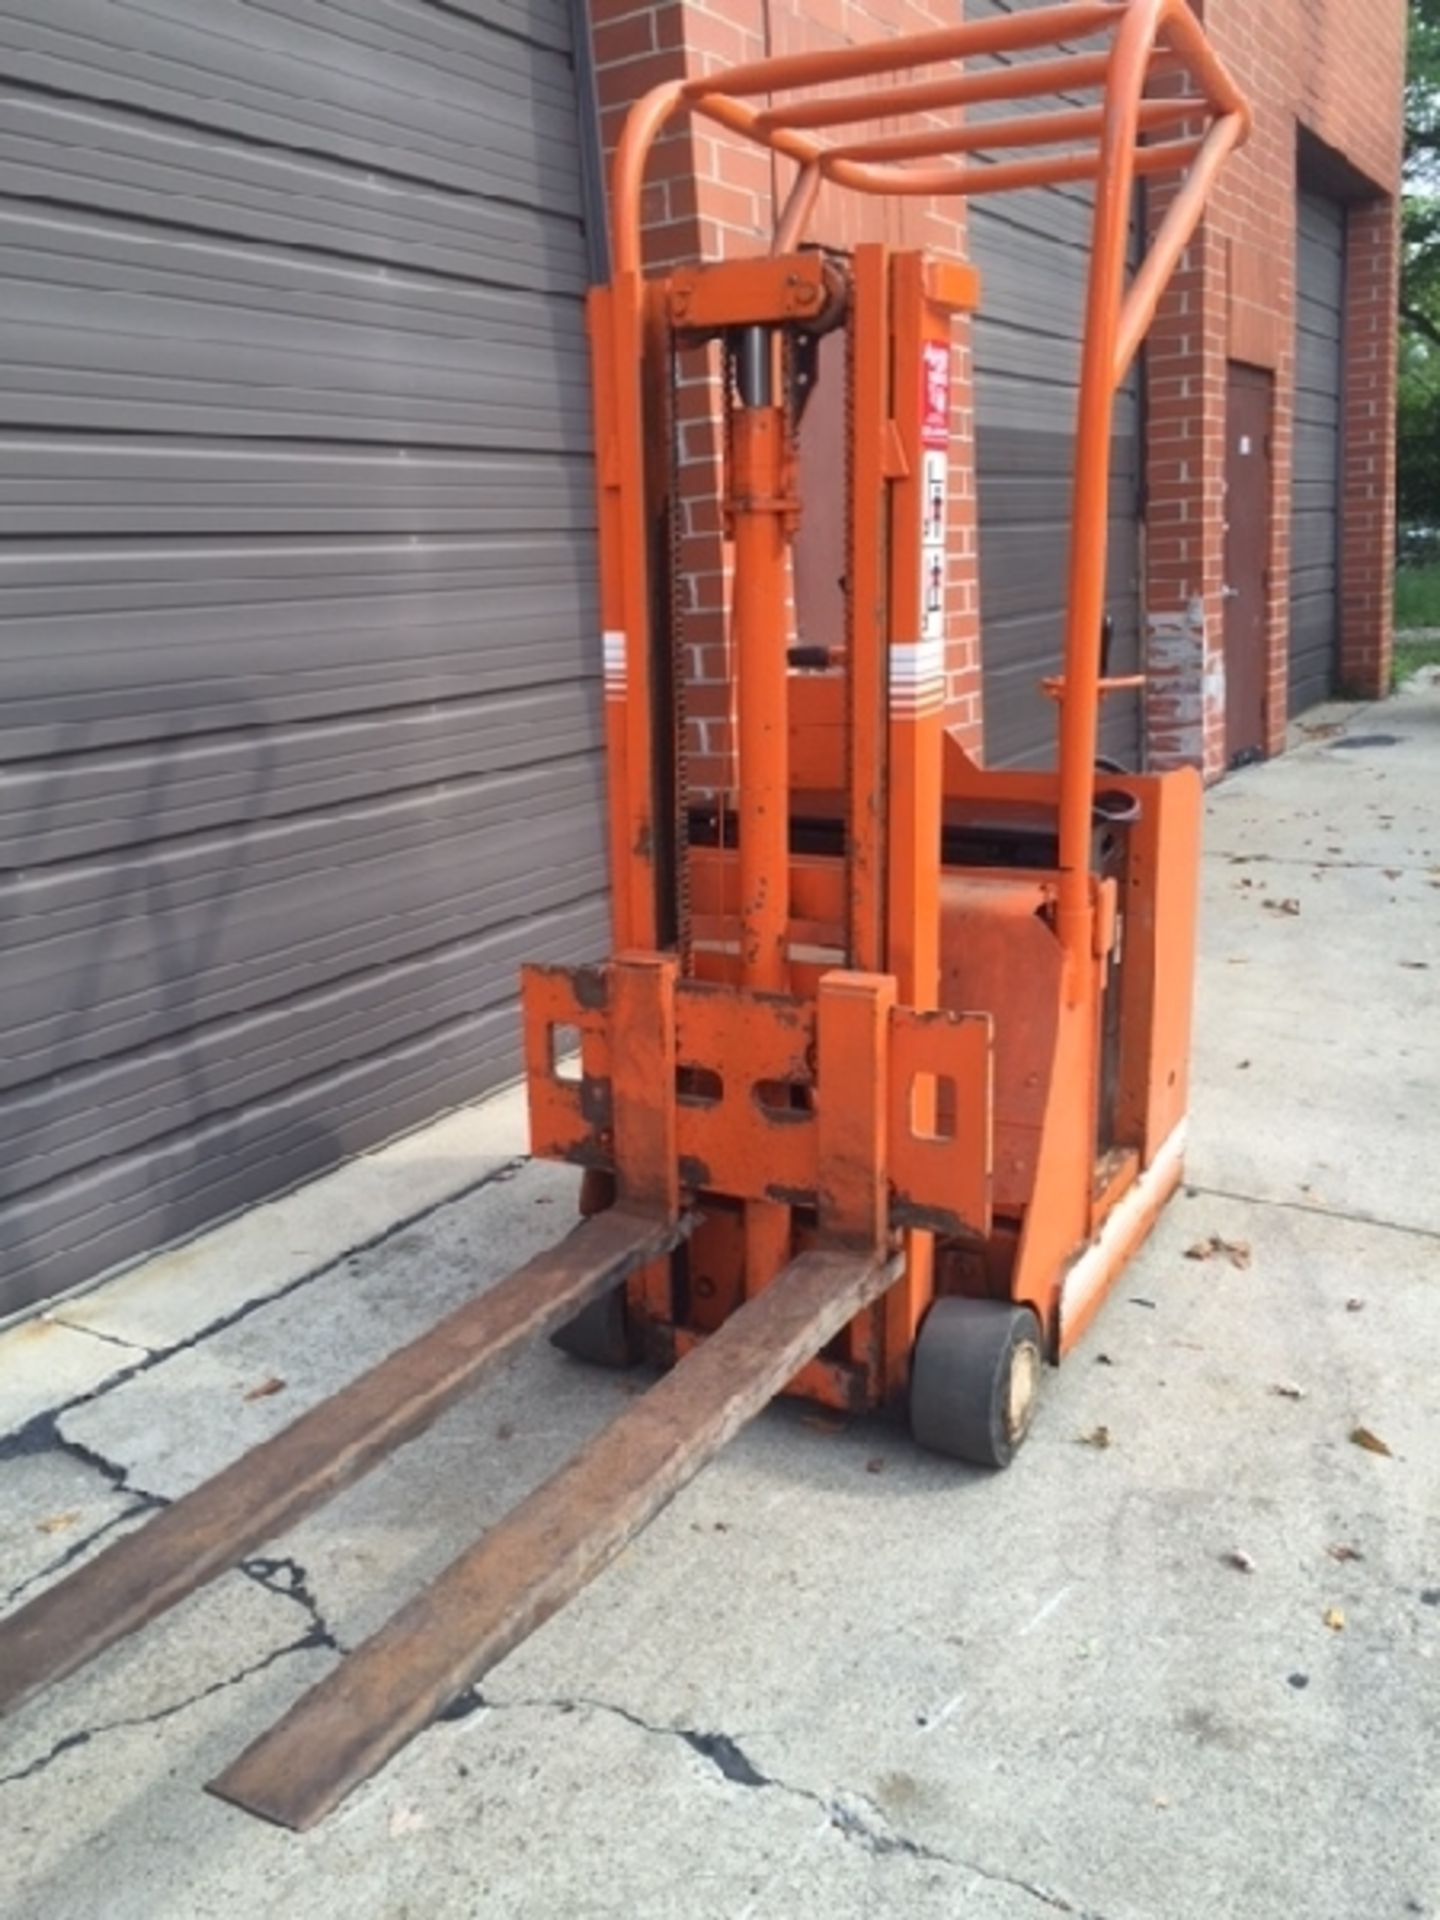 Automatic/Yale forklift 9 foot lift 2000lb. Cap 24 volt battery 110v charger Compact design - Image 2 of 4